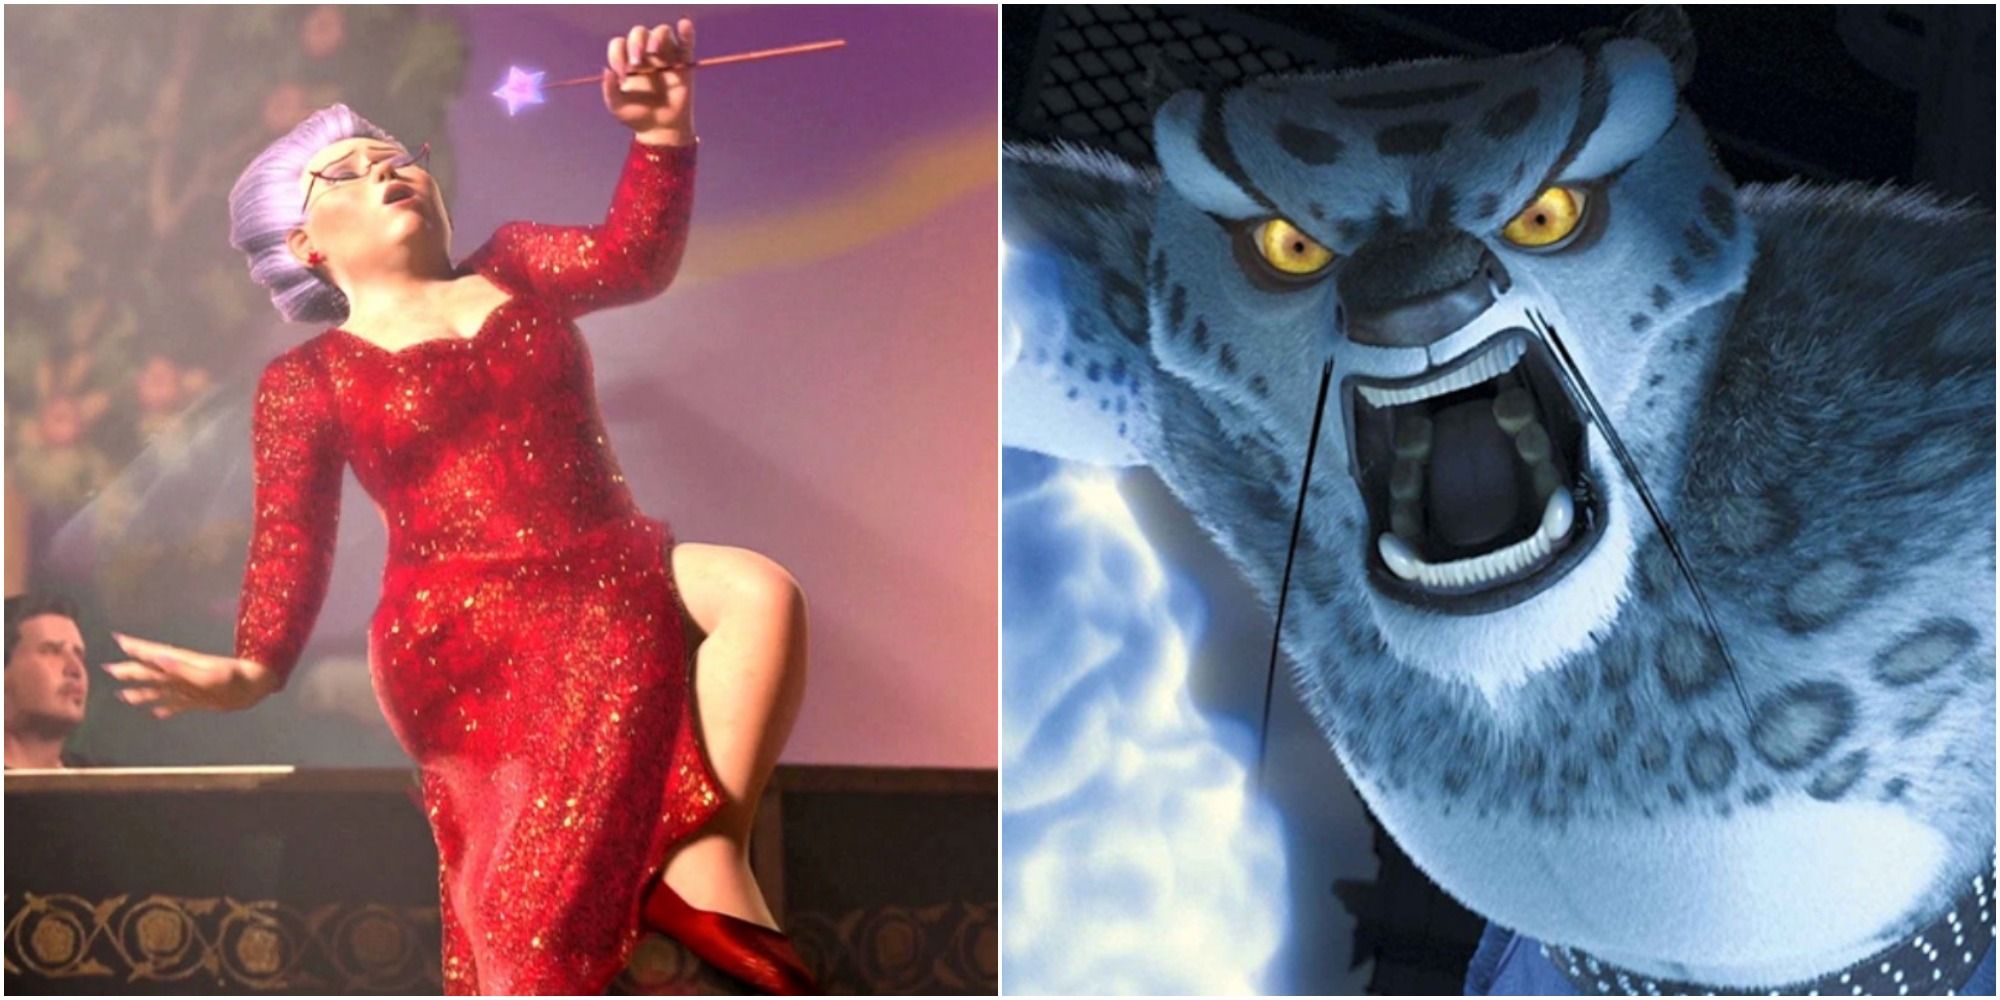 Split Image showing Fairy Godmother and Tai Lung